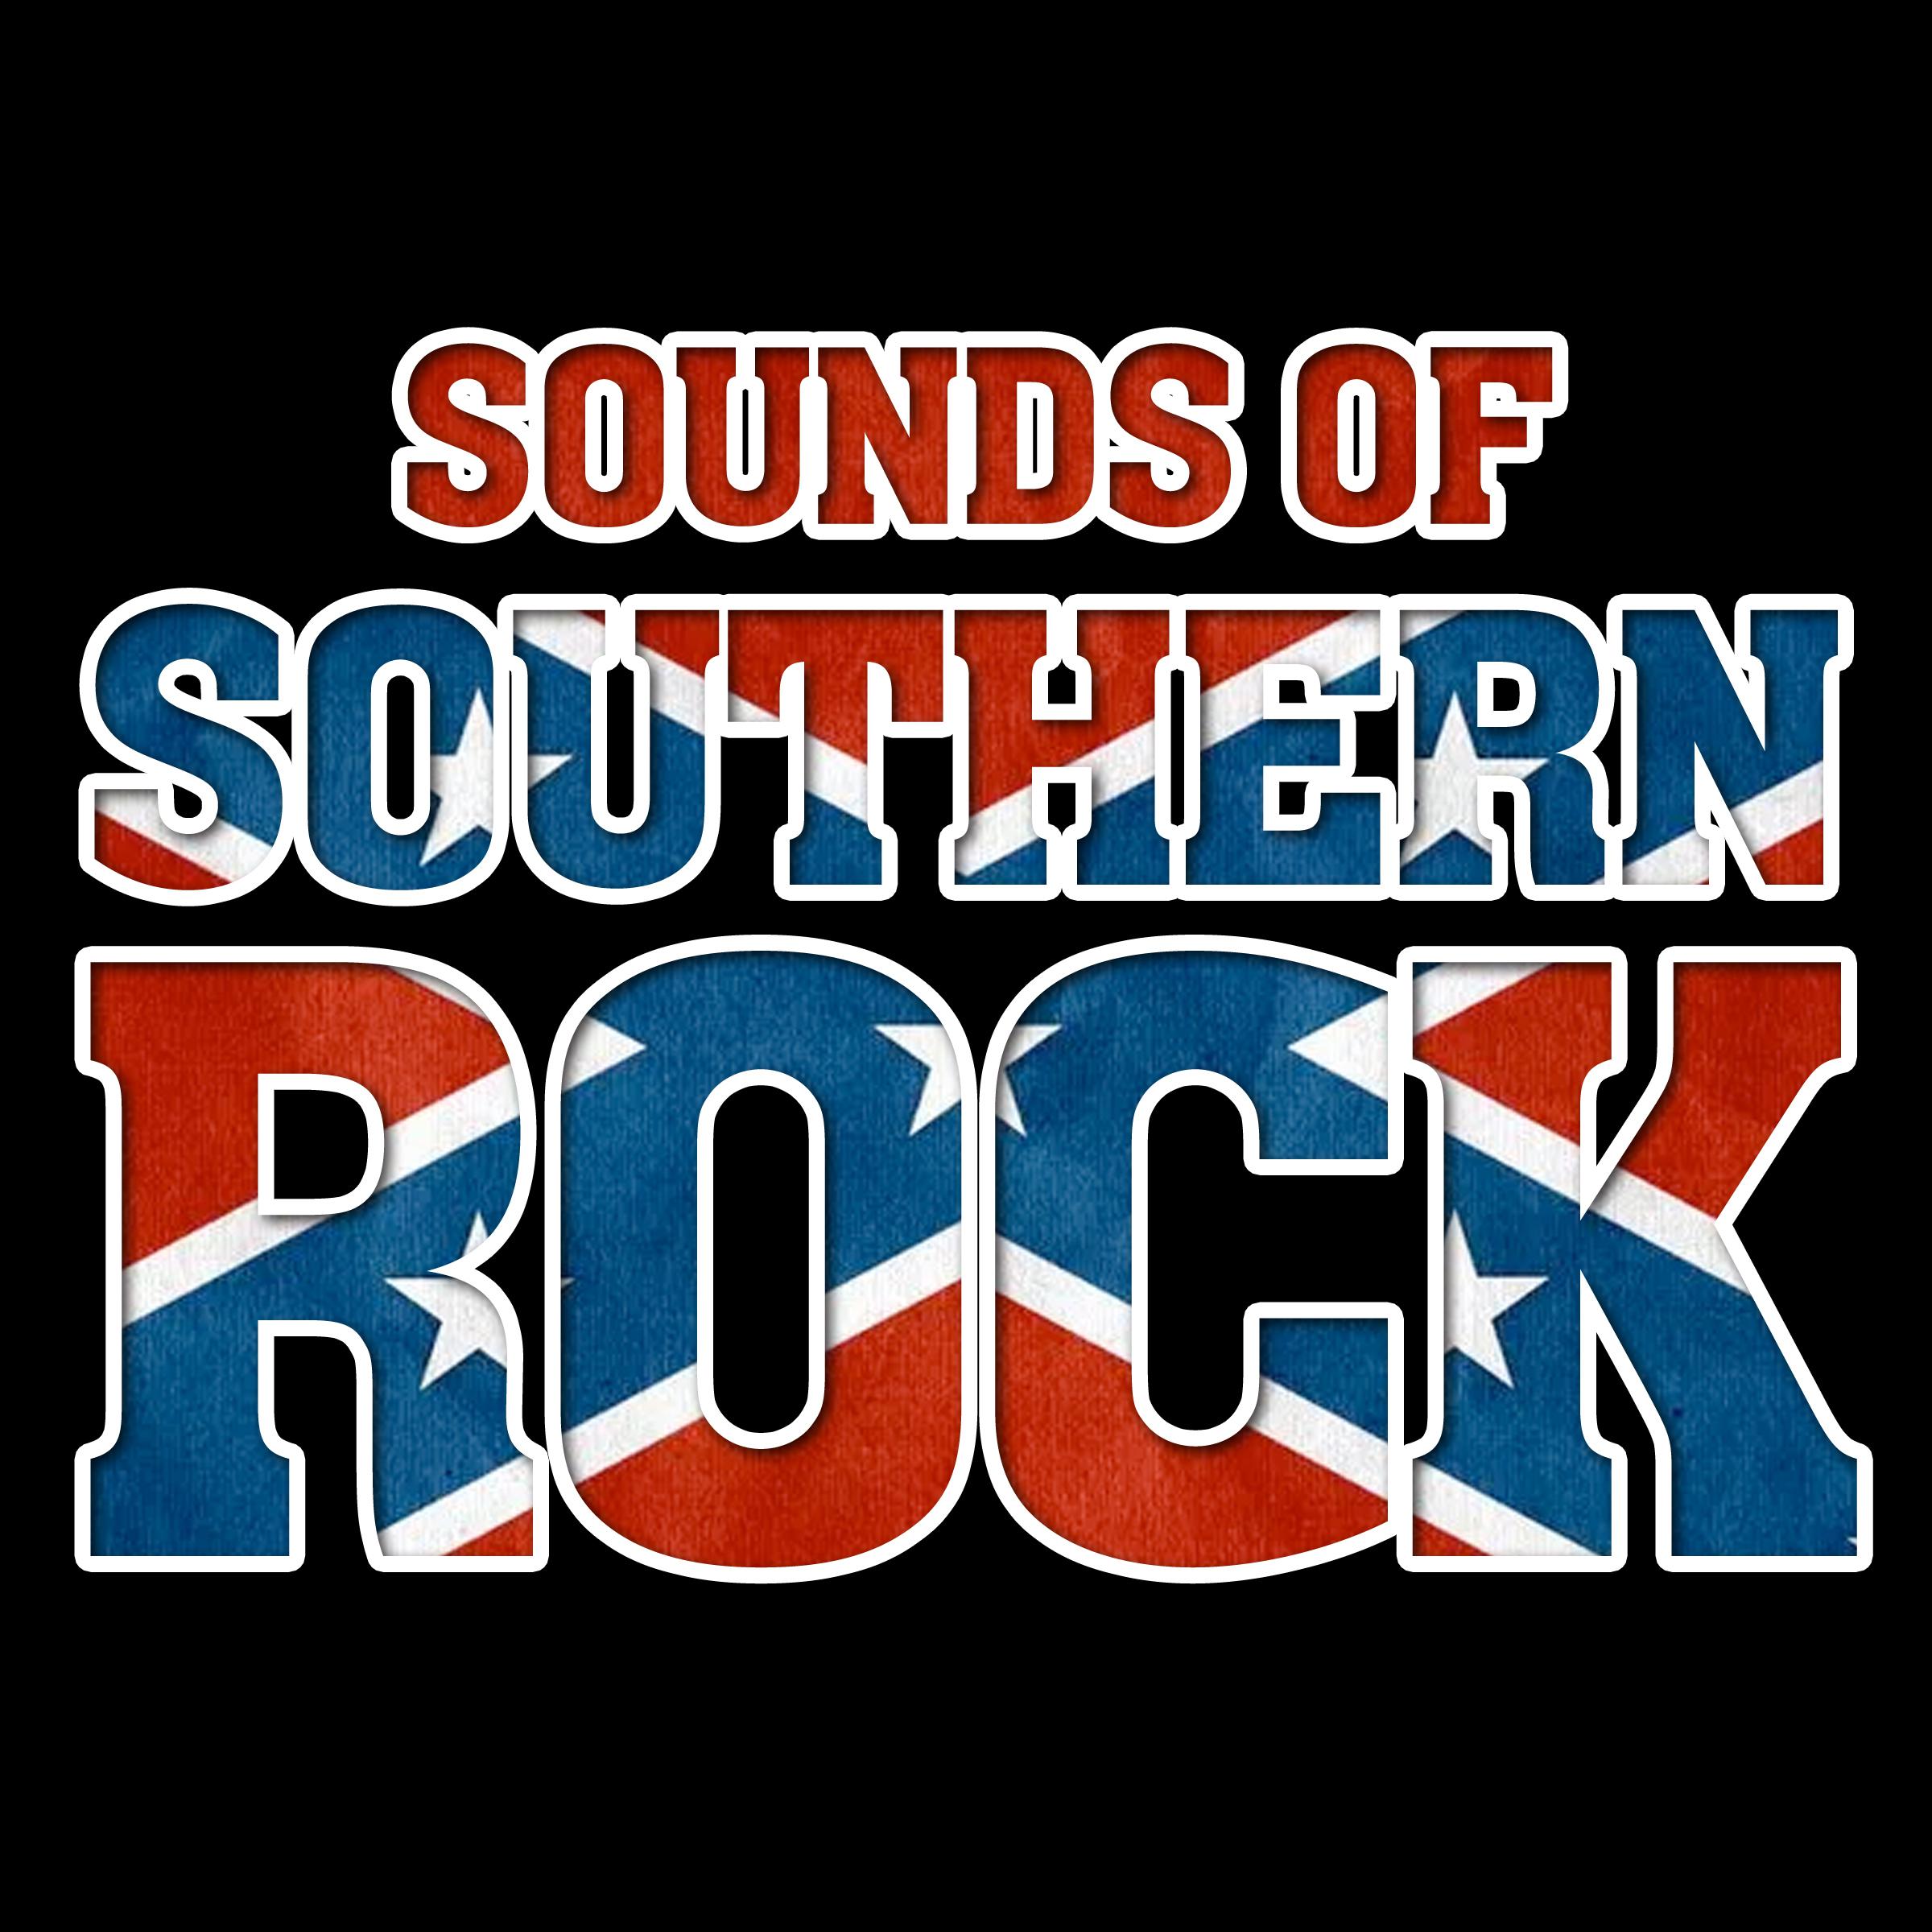 Sounds of Southern Rock